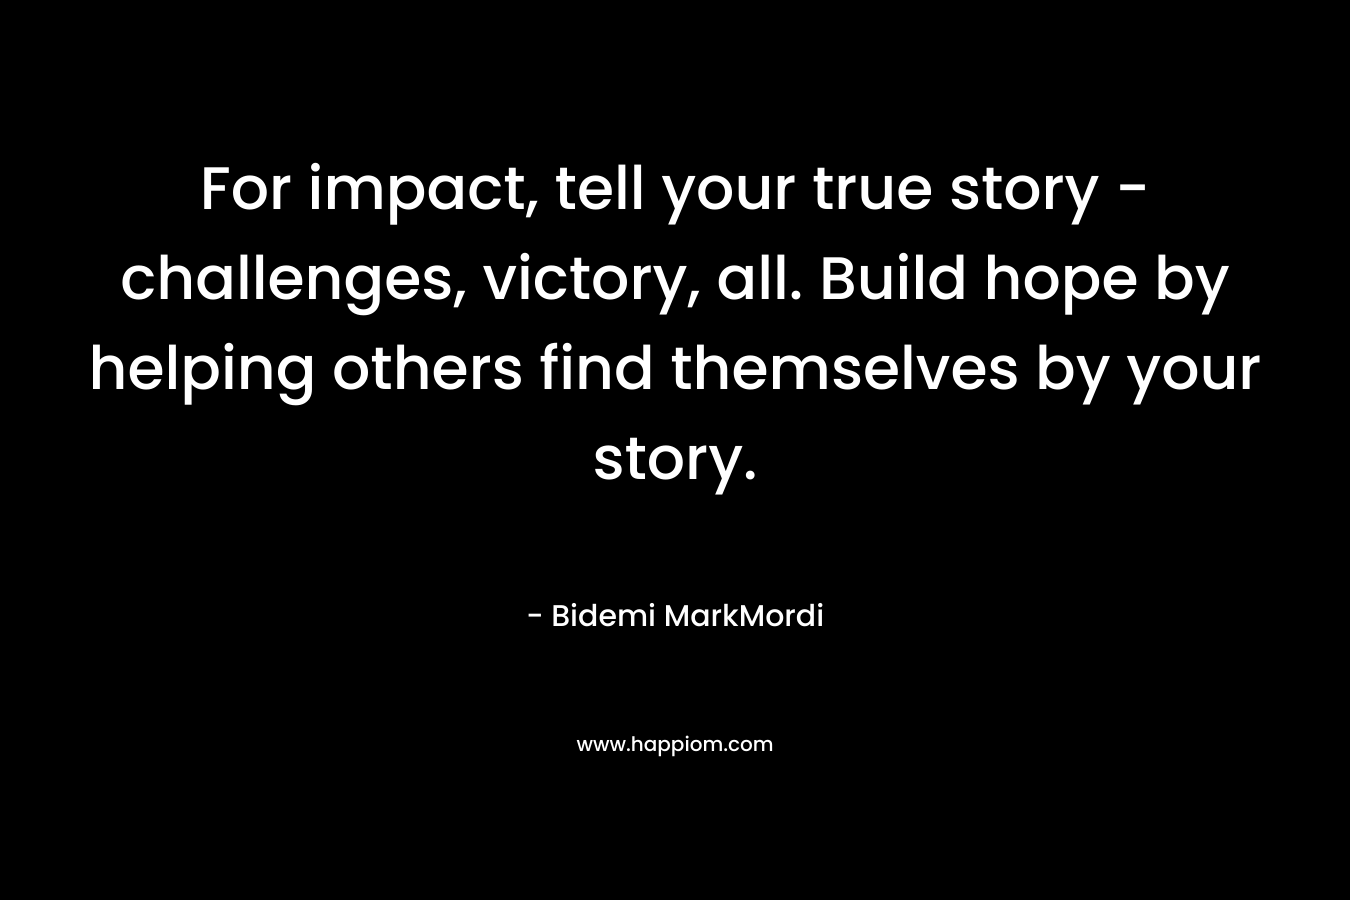 For impact, tell your true story -challenges, victory, all. Build hope by helping others find themselves by your story. – Bidemi MarkMordi